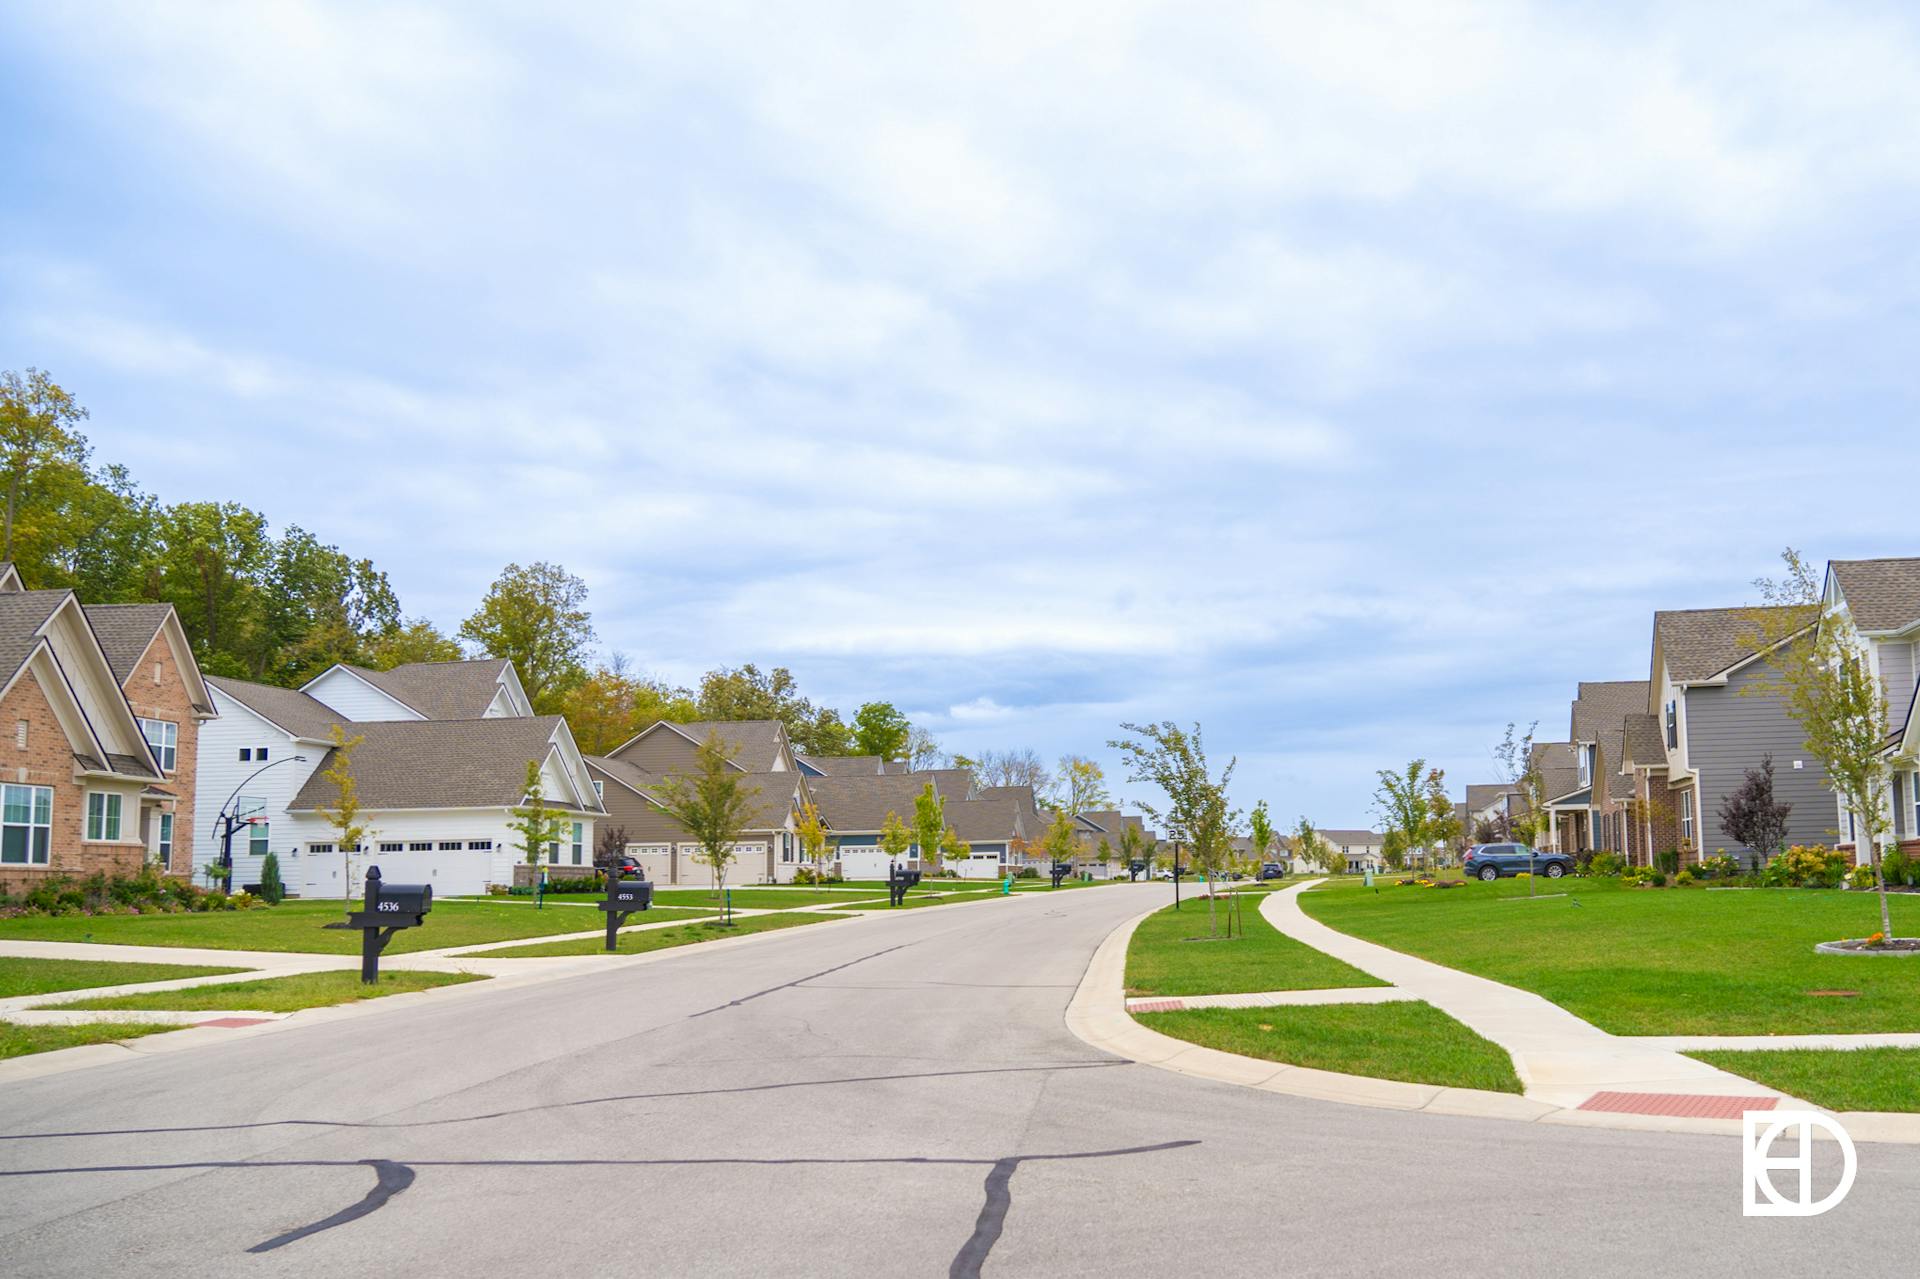 Photo of street view of Hampshire neighborhood in Zionsville, Indiana.